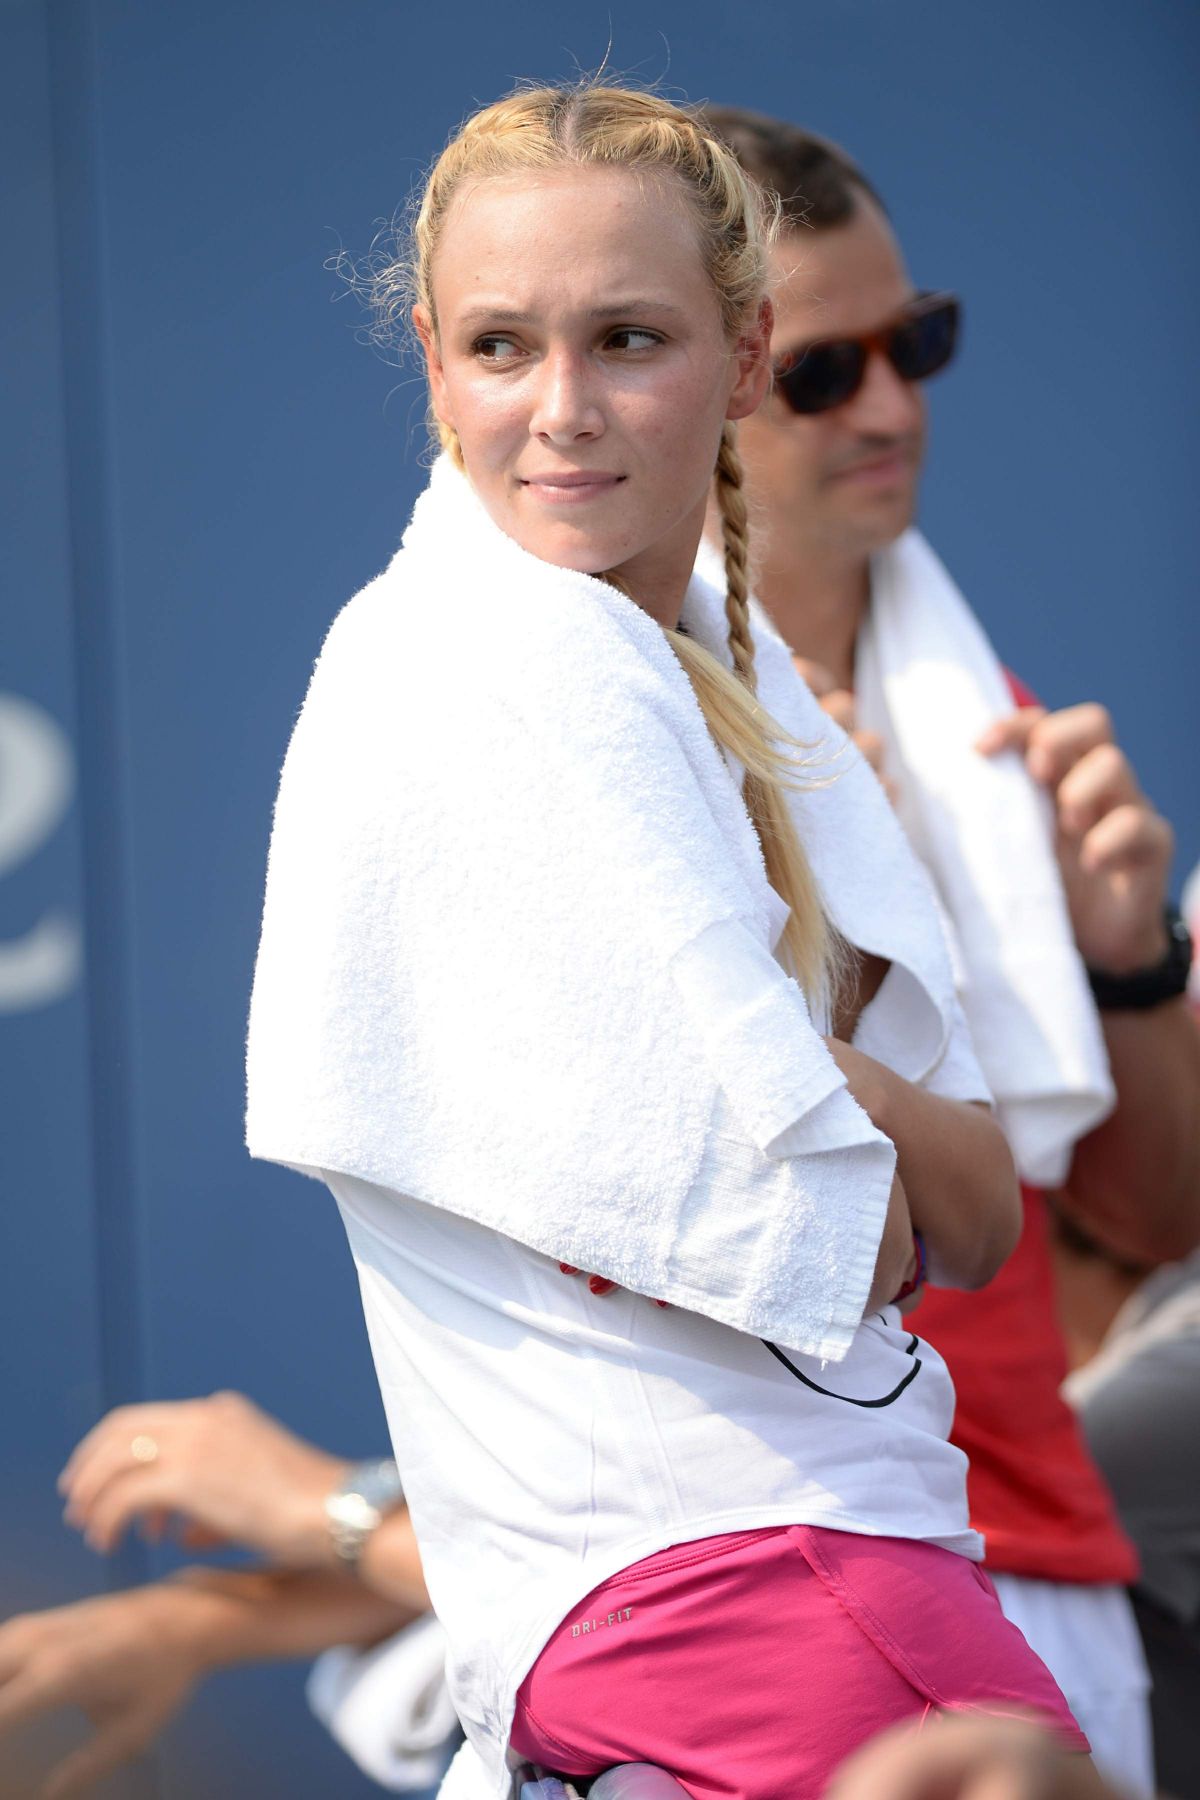 DONNA VEKIC at Stan Wawrinka Match at 2015 US Open in New York 09/03/2015.